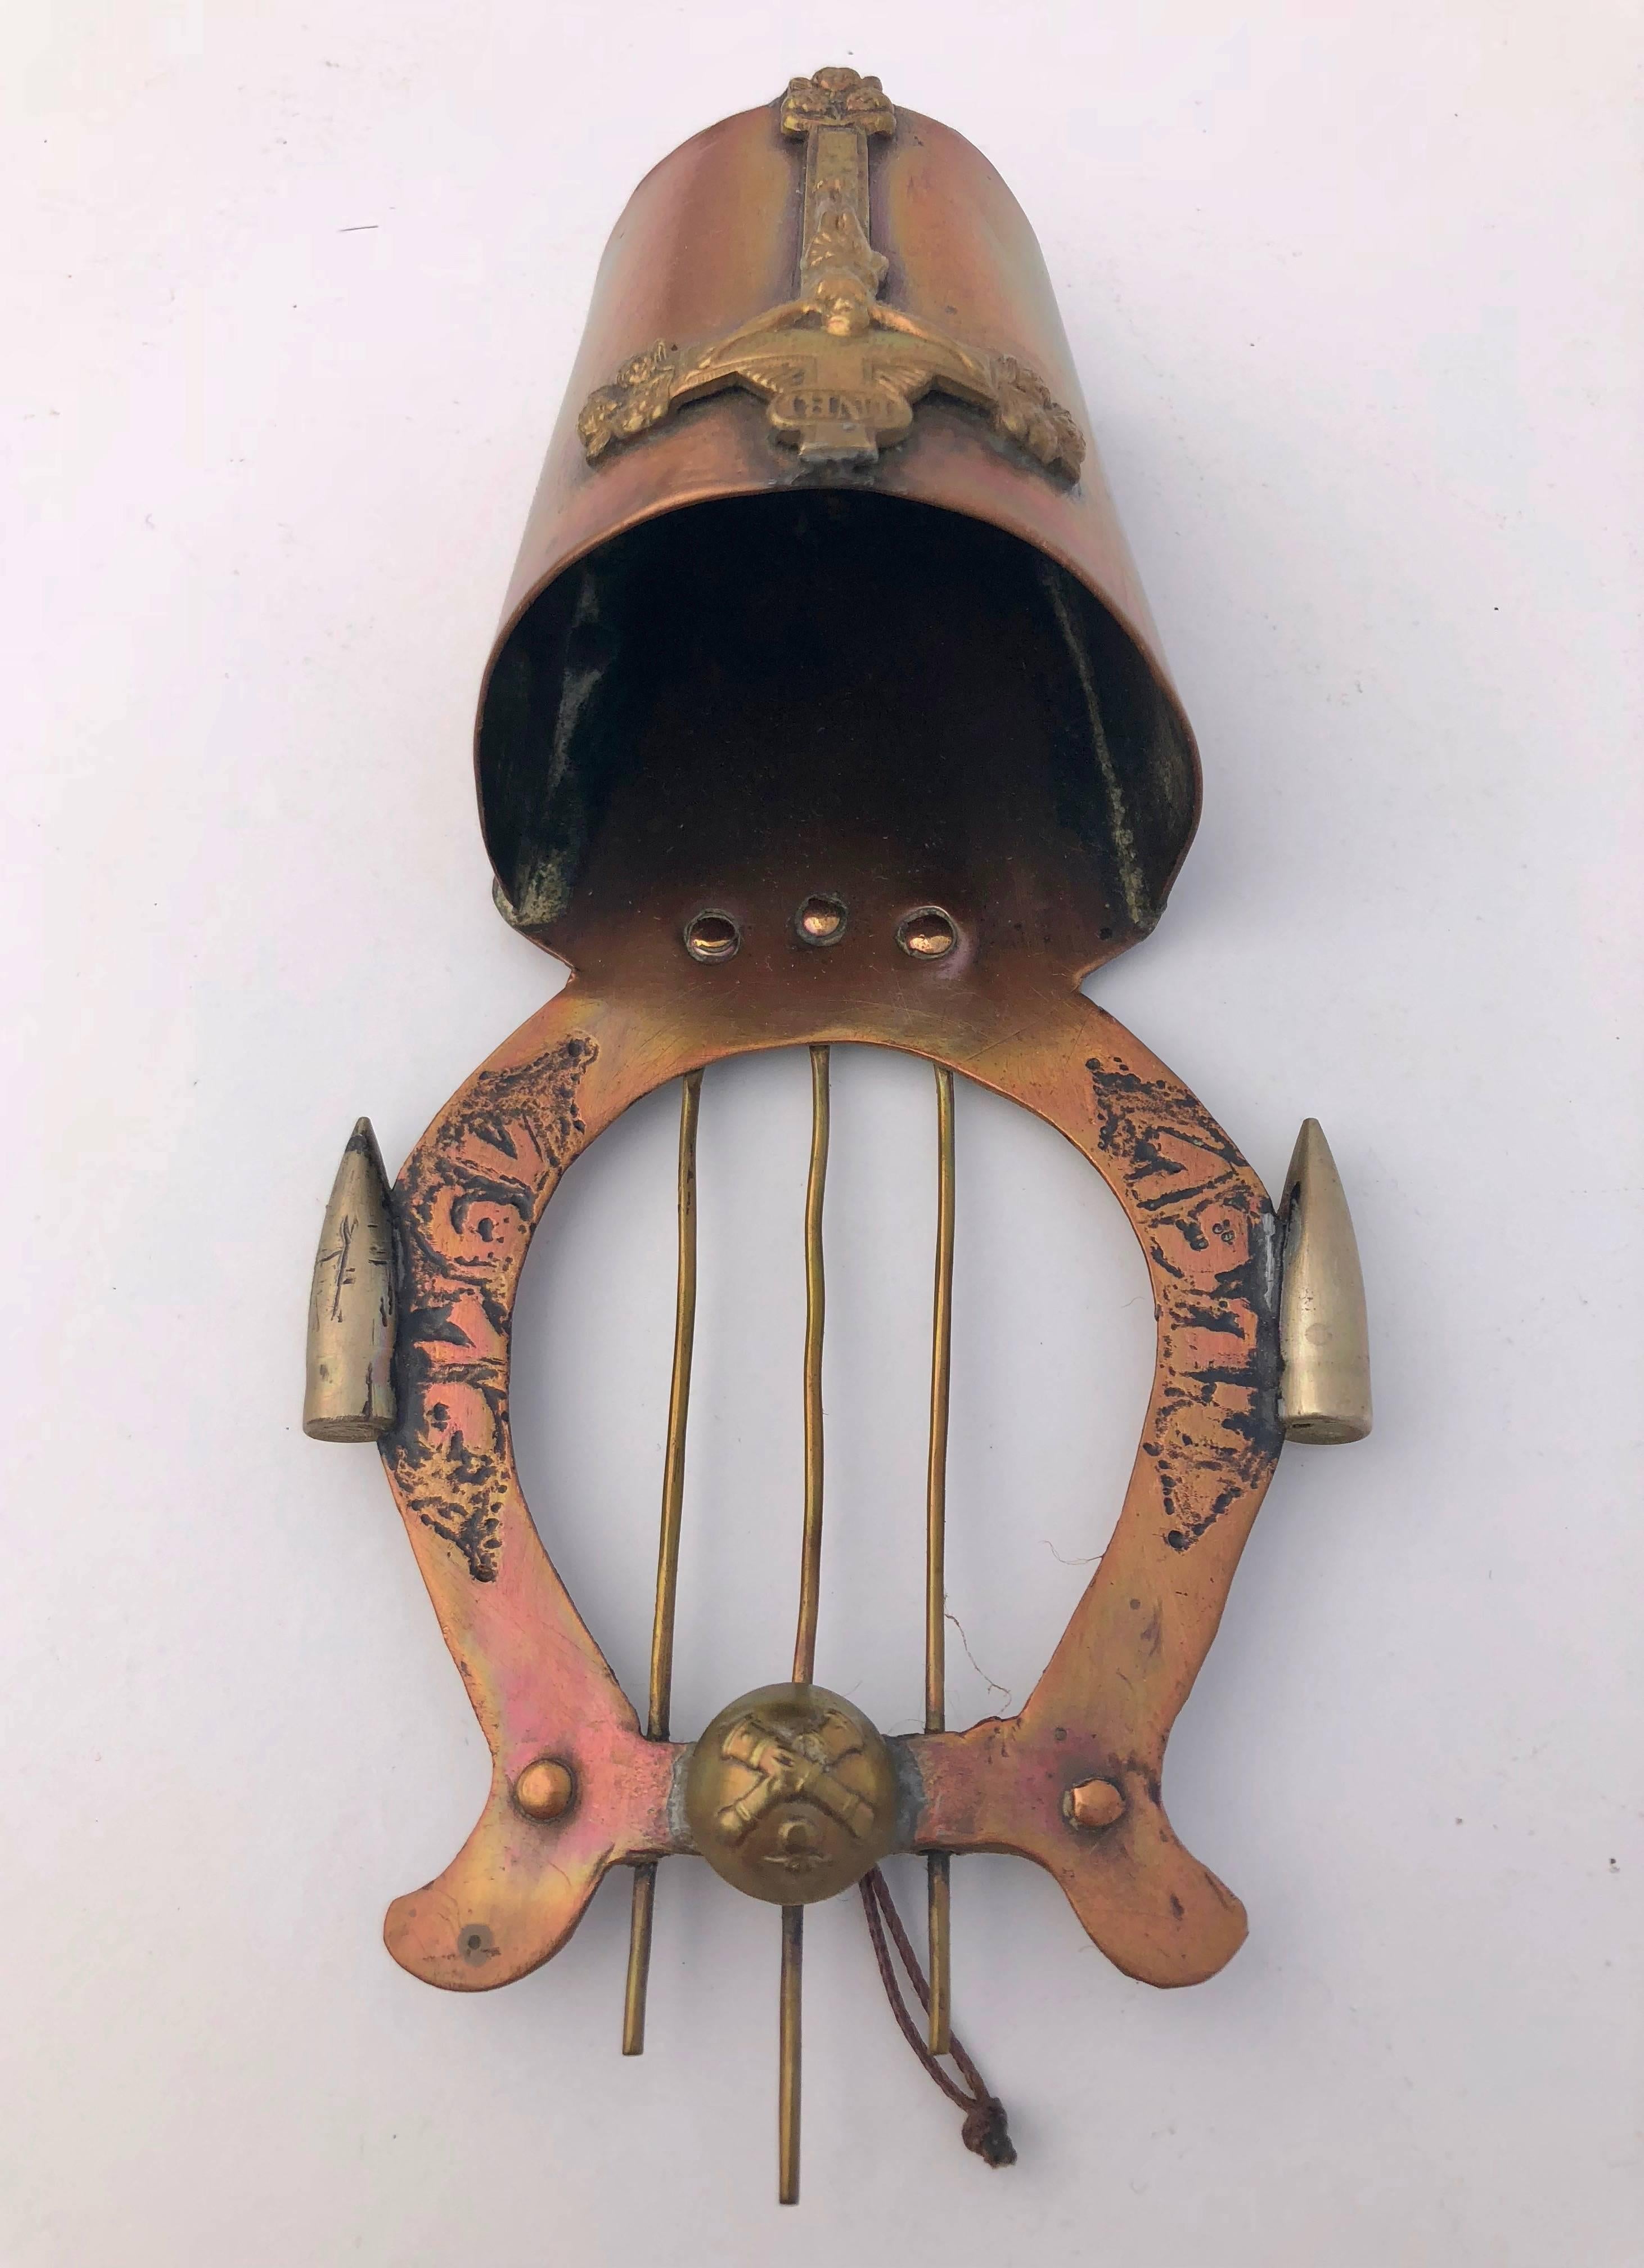 These handmade brass and copper Trench art holy water bénitiers with crosses or a crucifix are a truly unique and moving collection. Trench art is a decorative item made by soldiers or prisoners of war offering insight not only to their feelings and